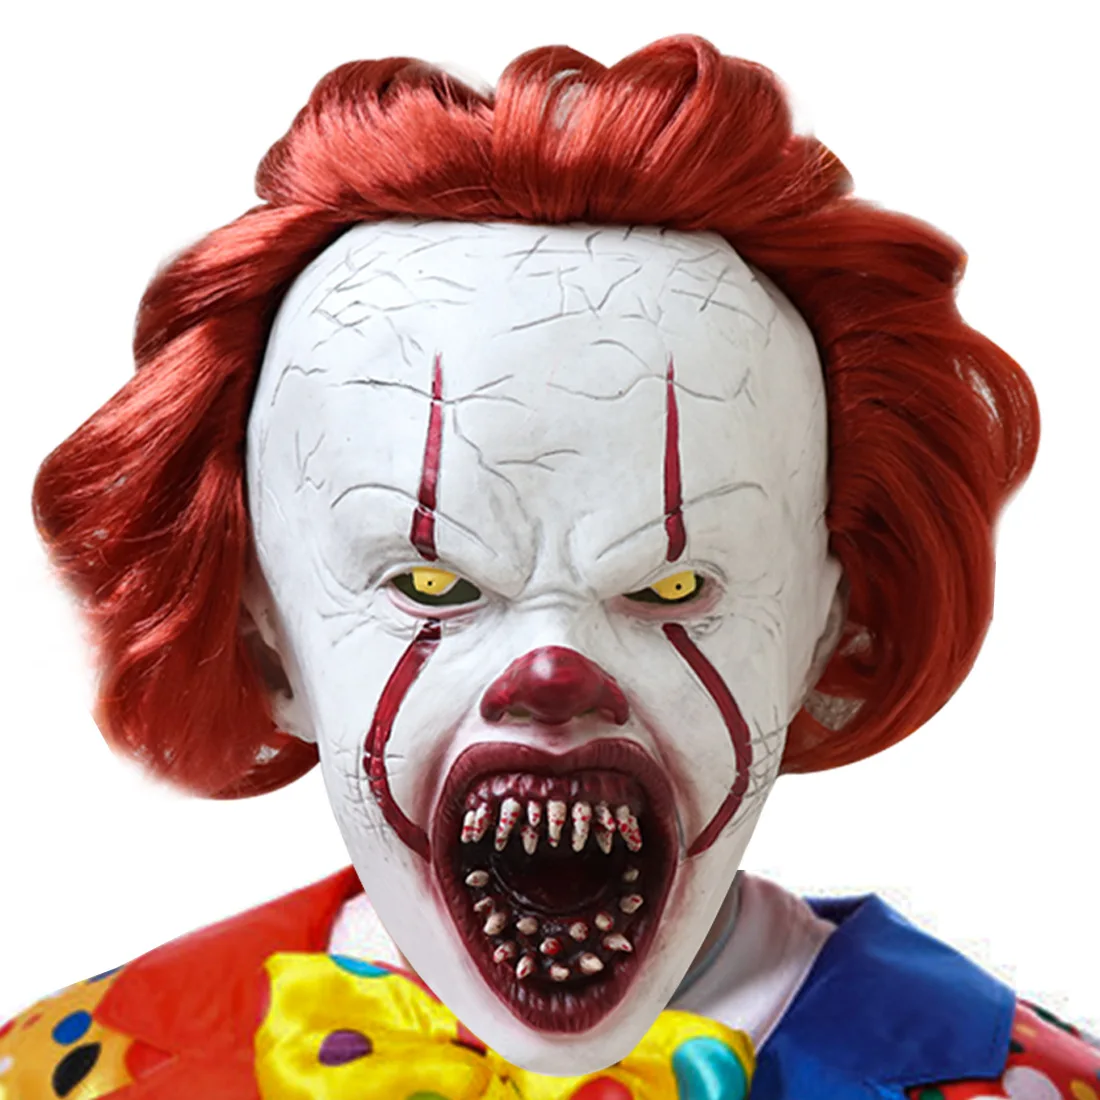 

Movie Joker Pennywise Mask Stephen King It Chapter Two 2 Horror Cosplay Latex Masks Helmet Clown Halloween Party Costume Masks